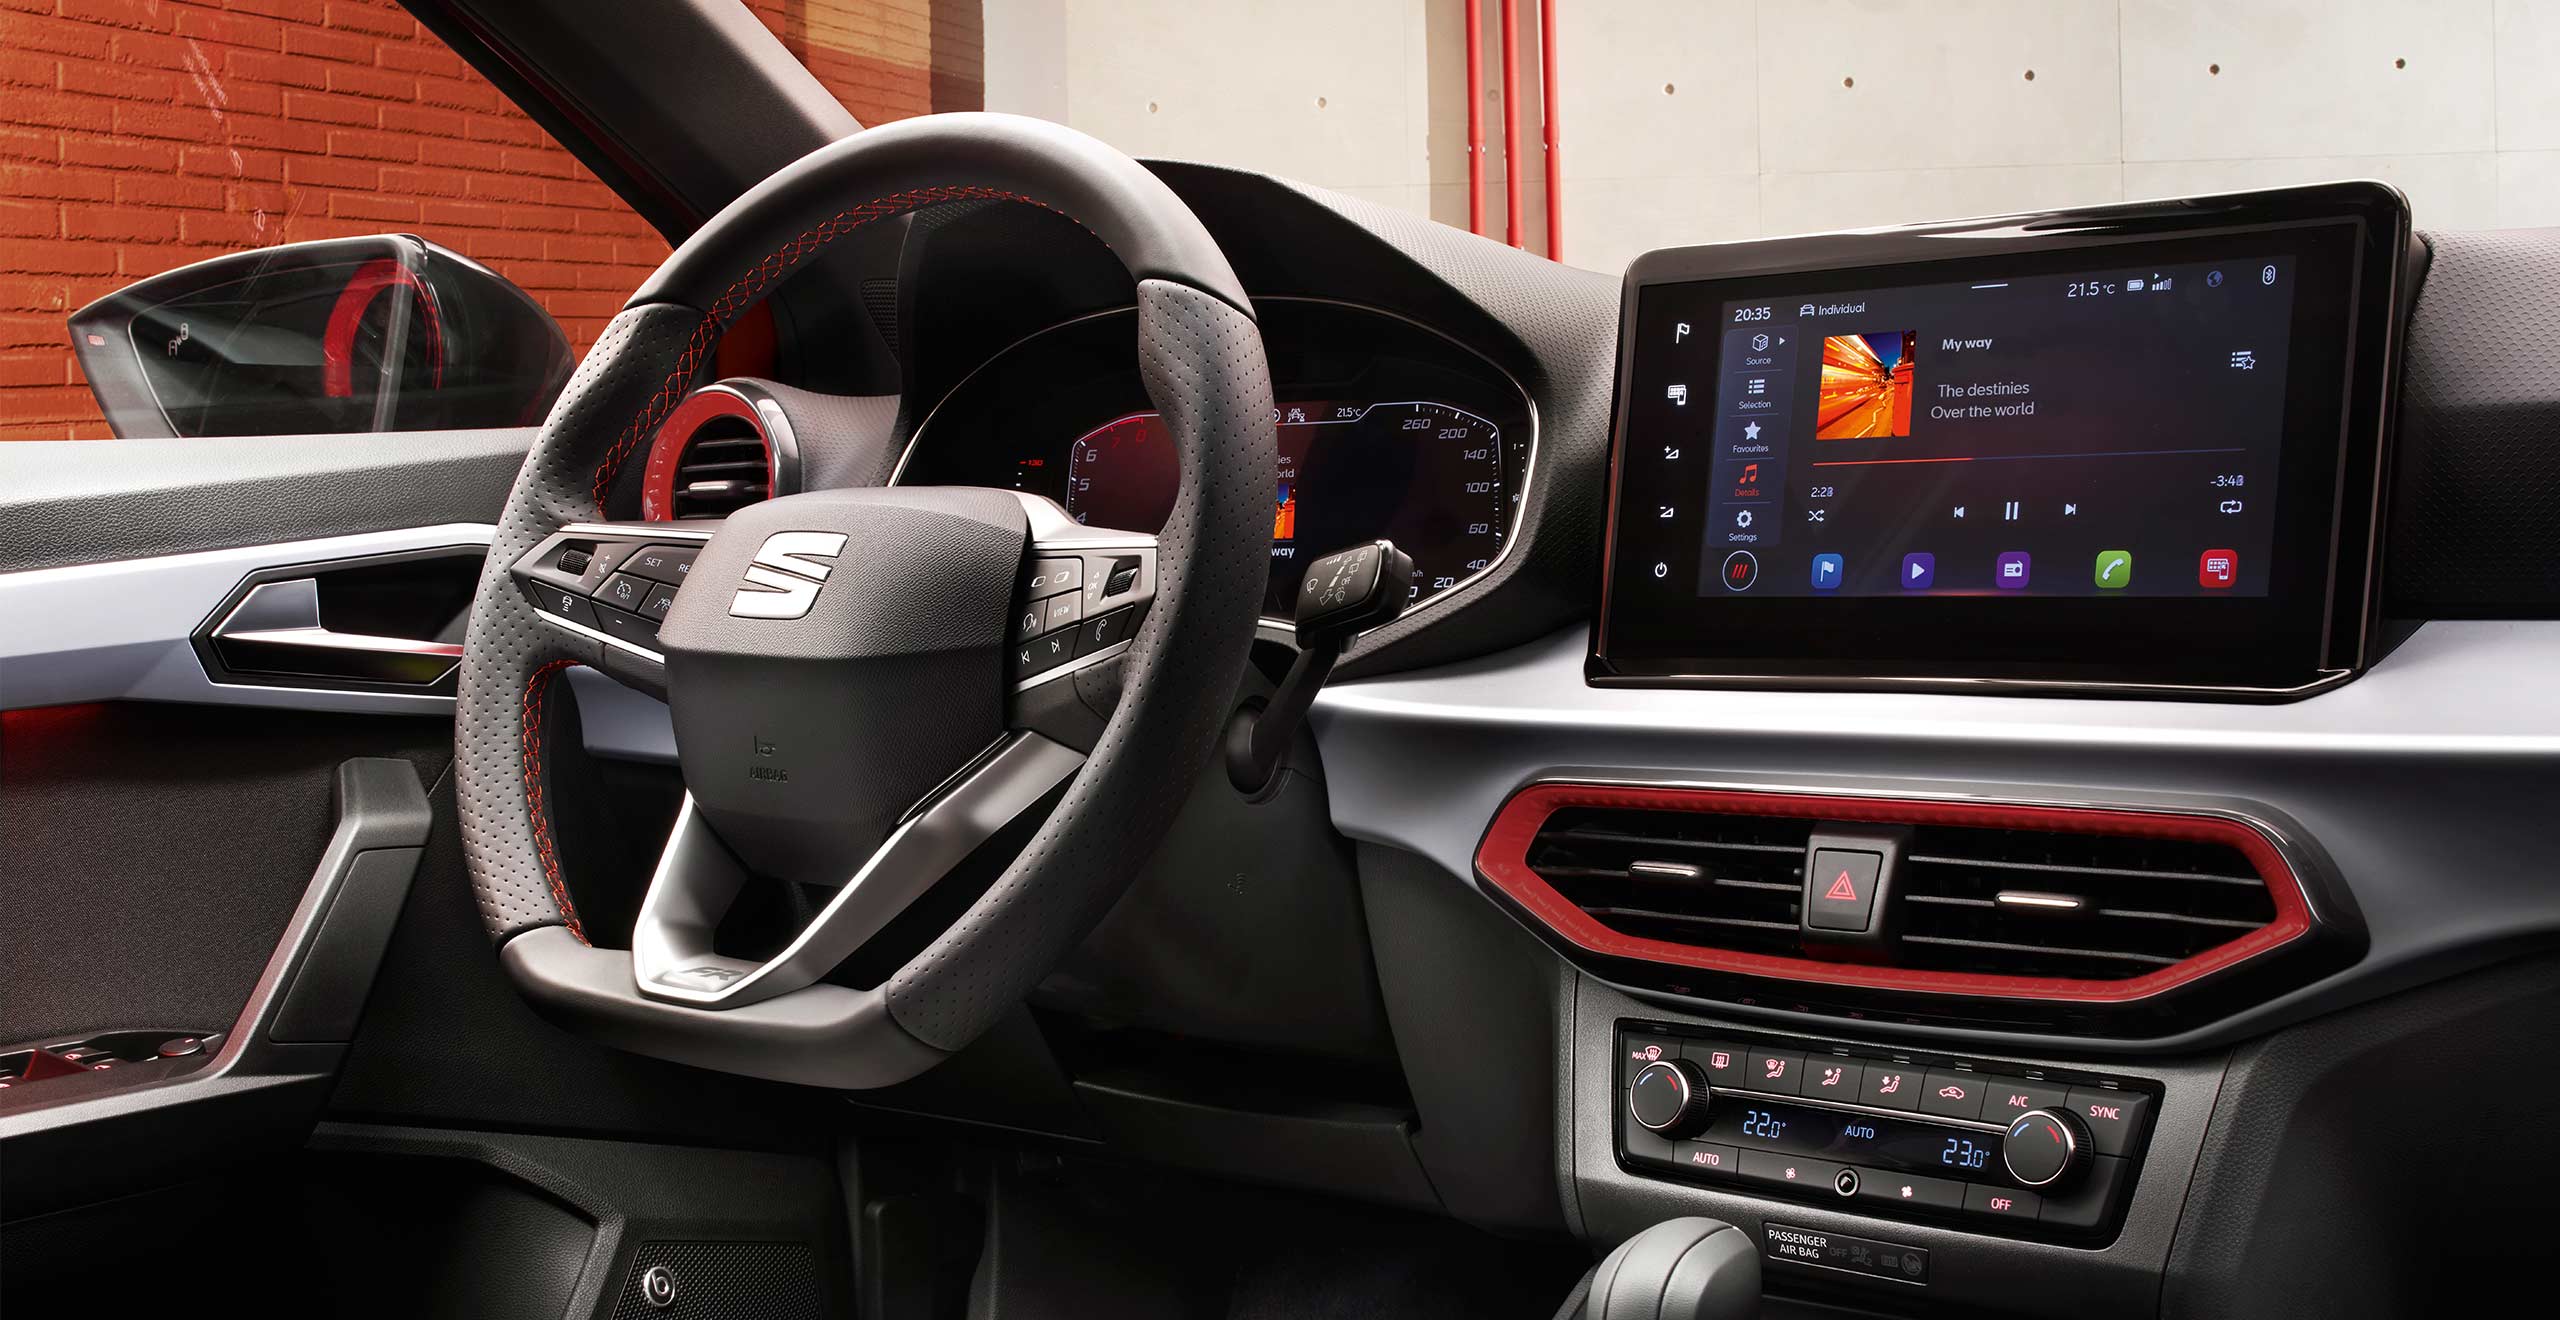 https://www.seat.ch/content/dam/public/seat-website/carworlds/new-ibiza/overview/two-columns-technology-new/x-large/seat-ibiza-interior-view-of-the-steering-wheel-and-dashboard.jpg